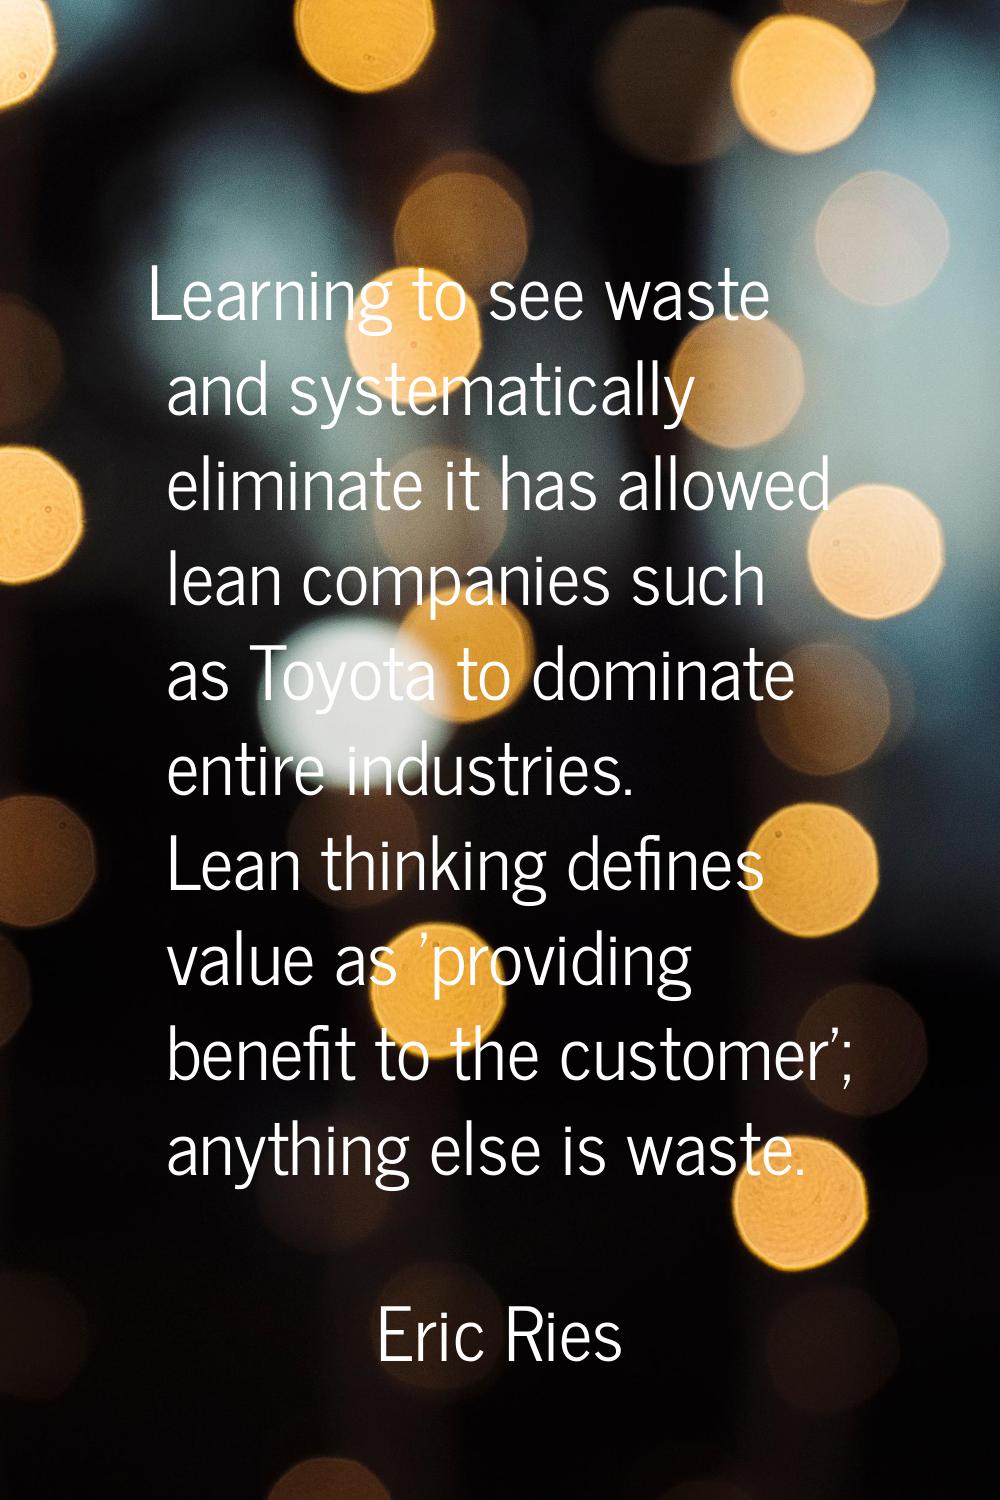 Learning to see waste and systematically eliminate it has allowed lean companies such as Toyota to 